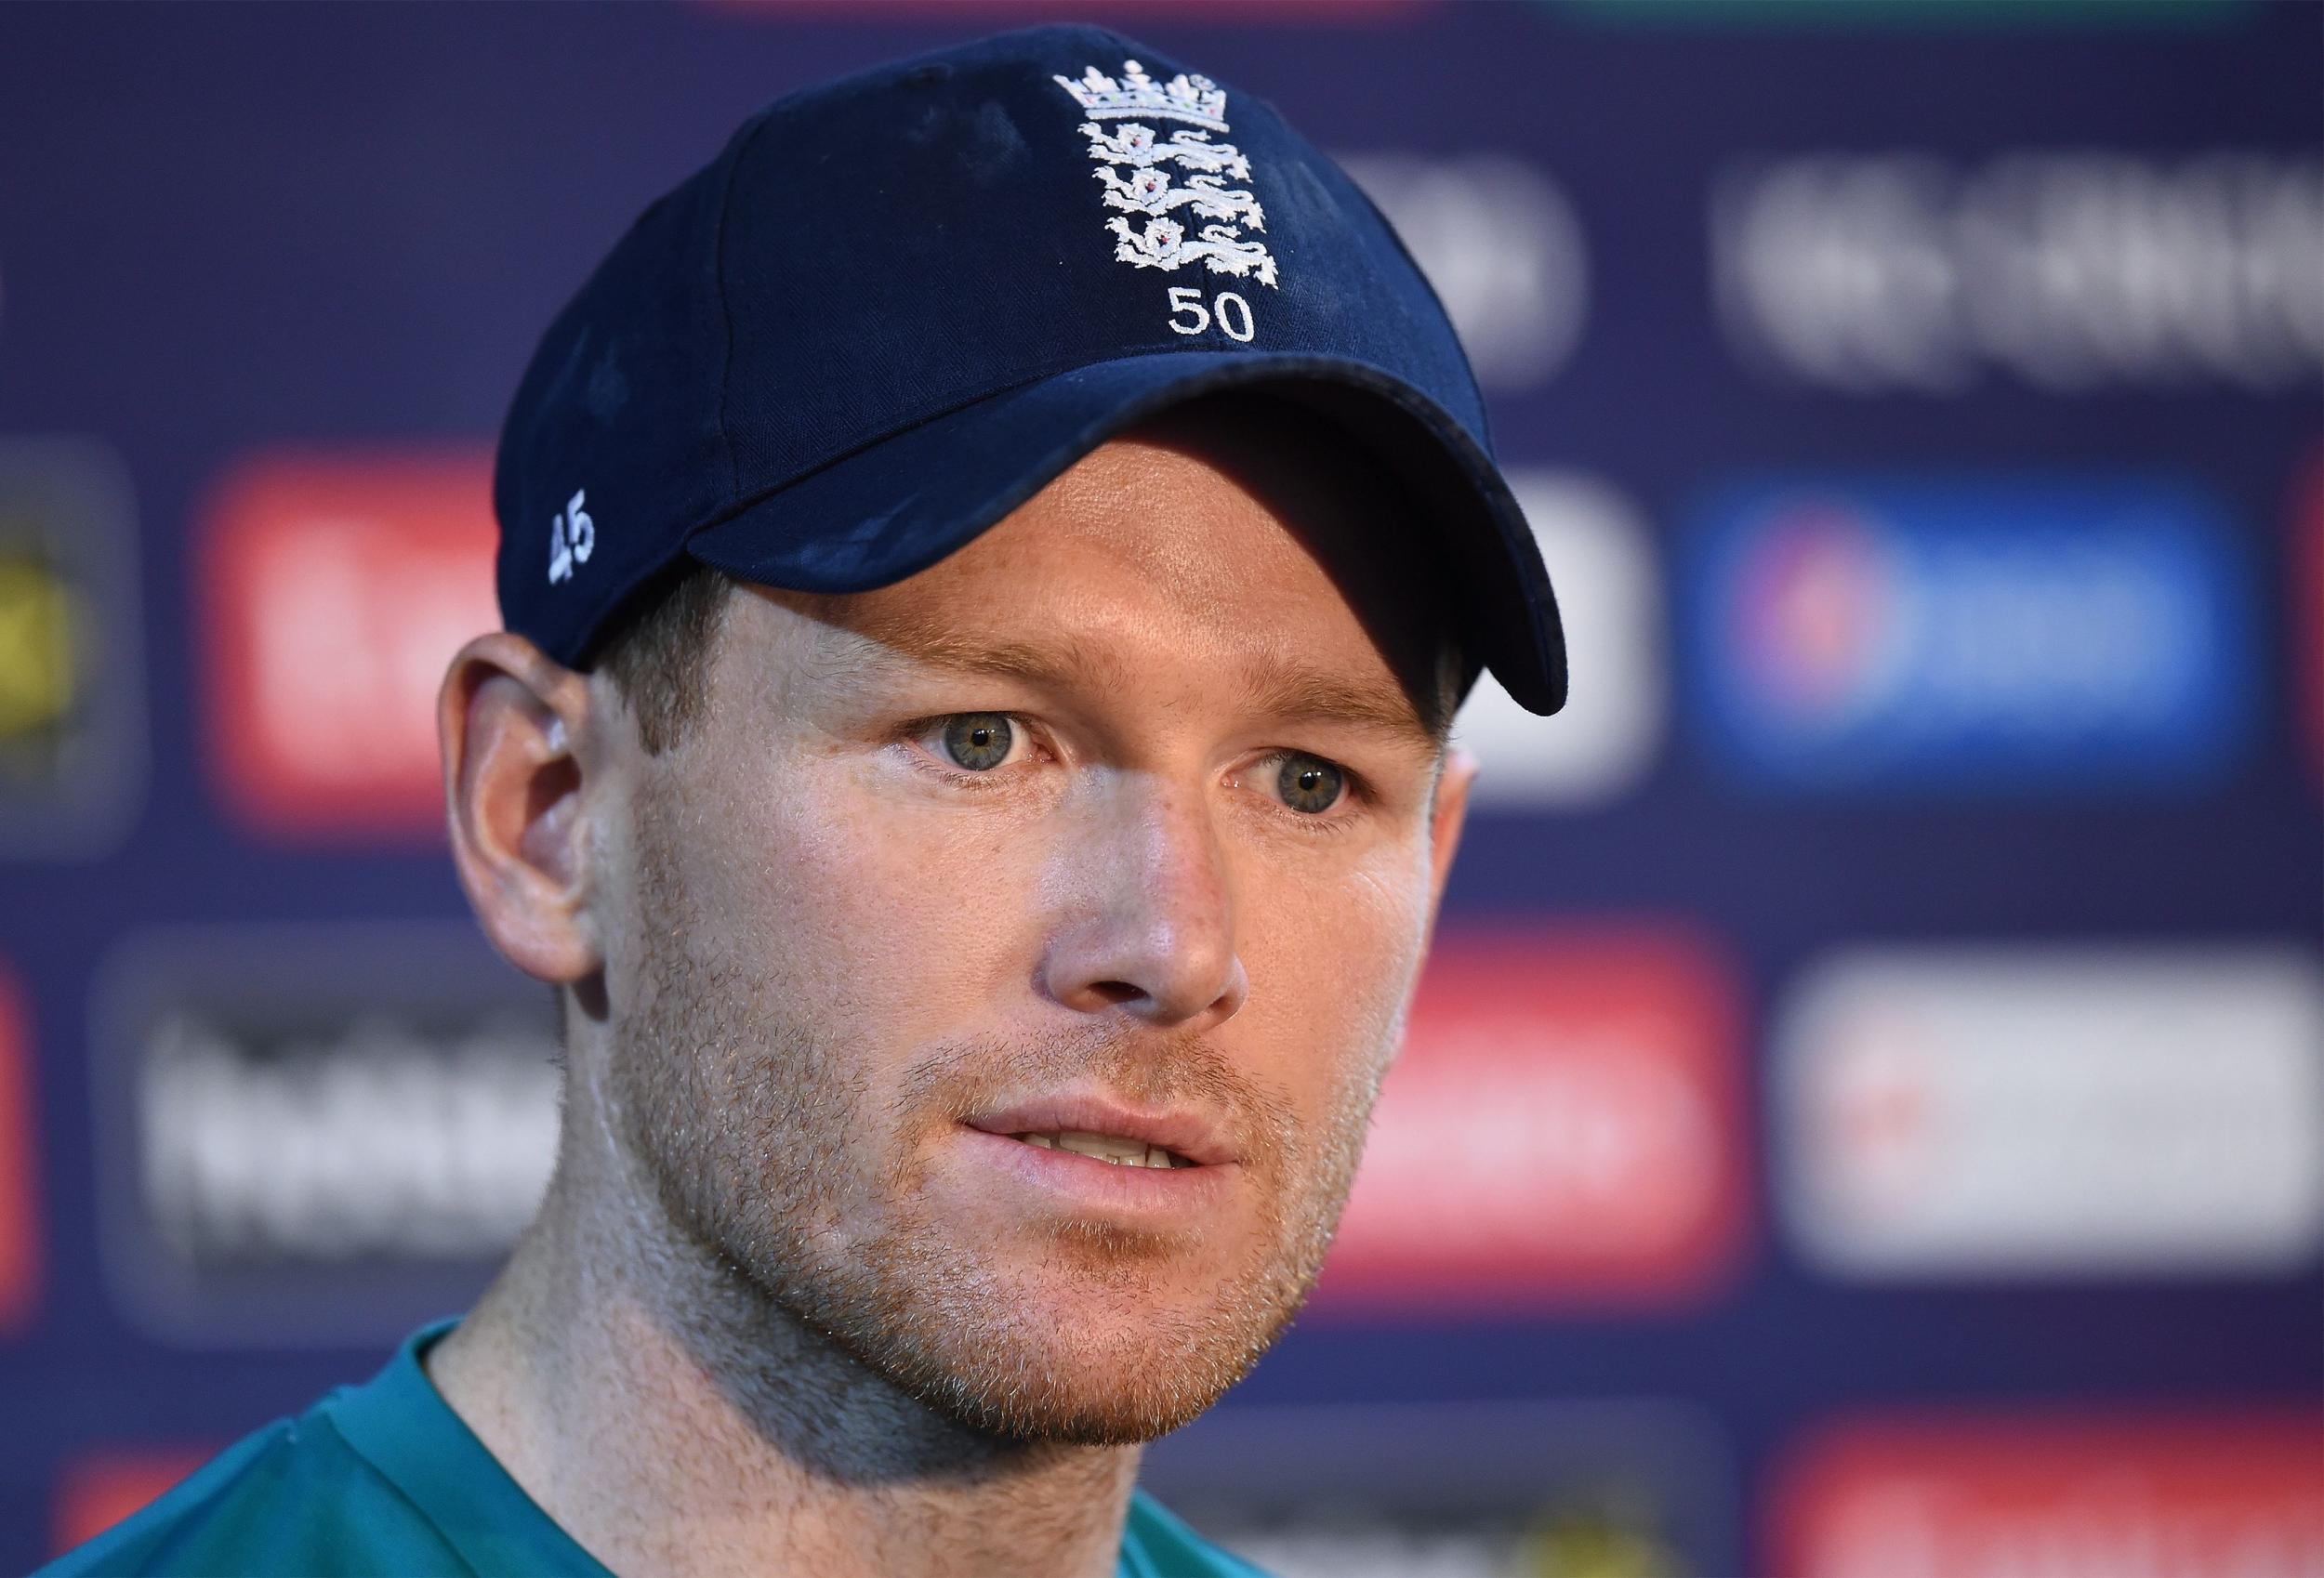 &#13;
Eoin Morgan has shown his ability to captain spin well (Getty)&#13;